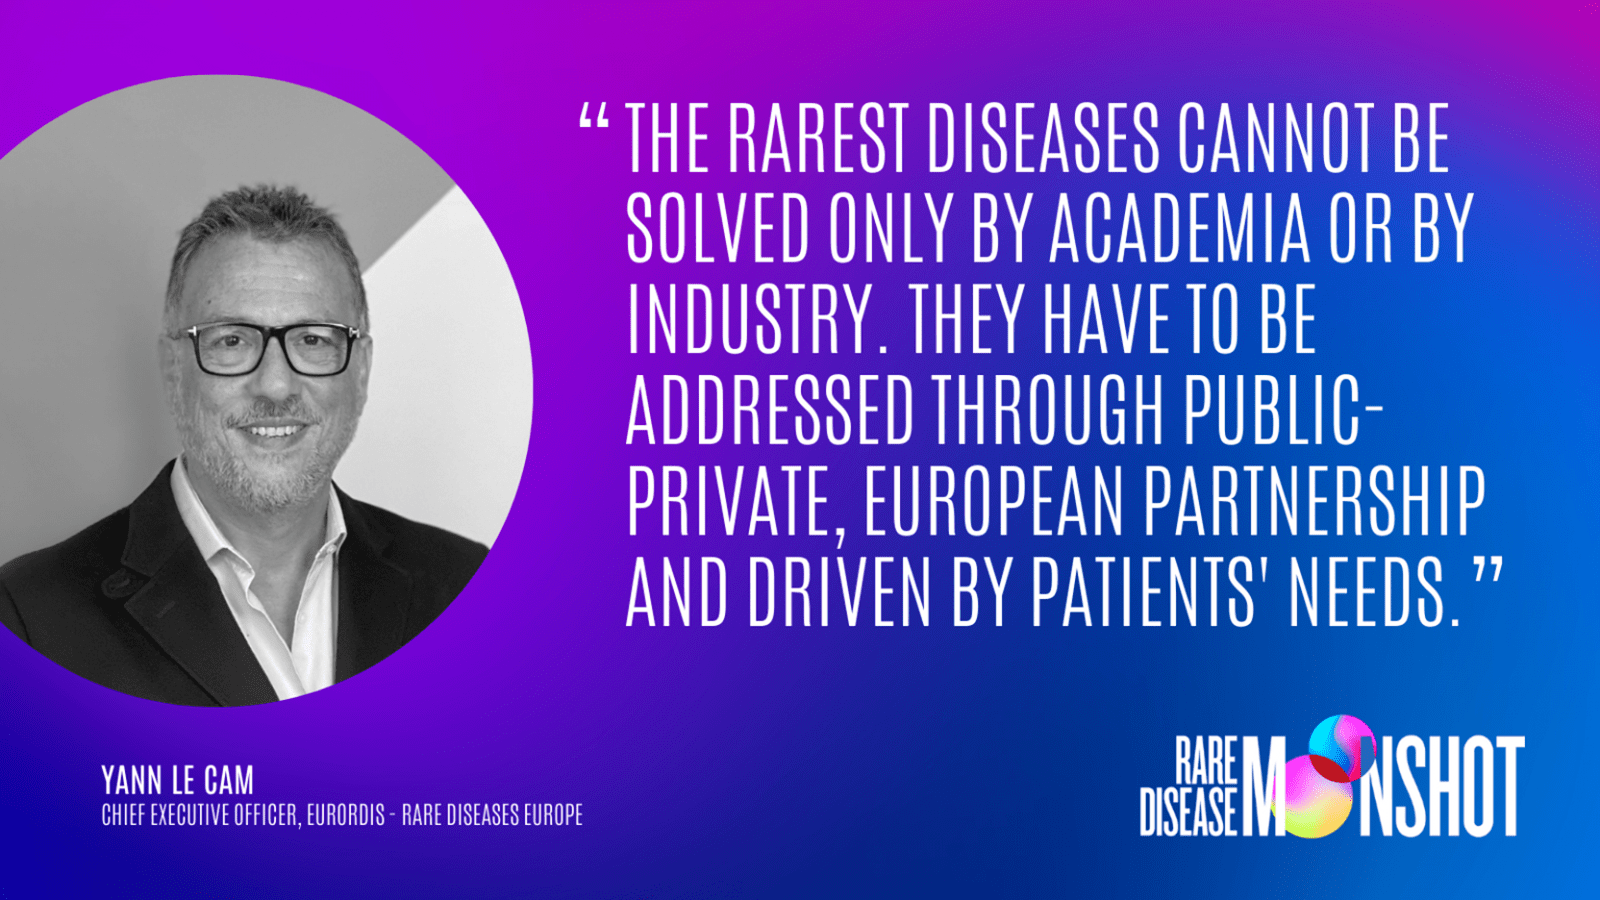 The rarest disease cannot be solved only by academia or by industry. They have to be addressed through public-private, European partnership and driven by patients' needs.